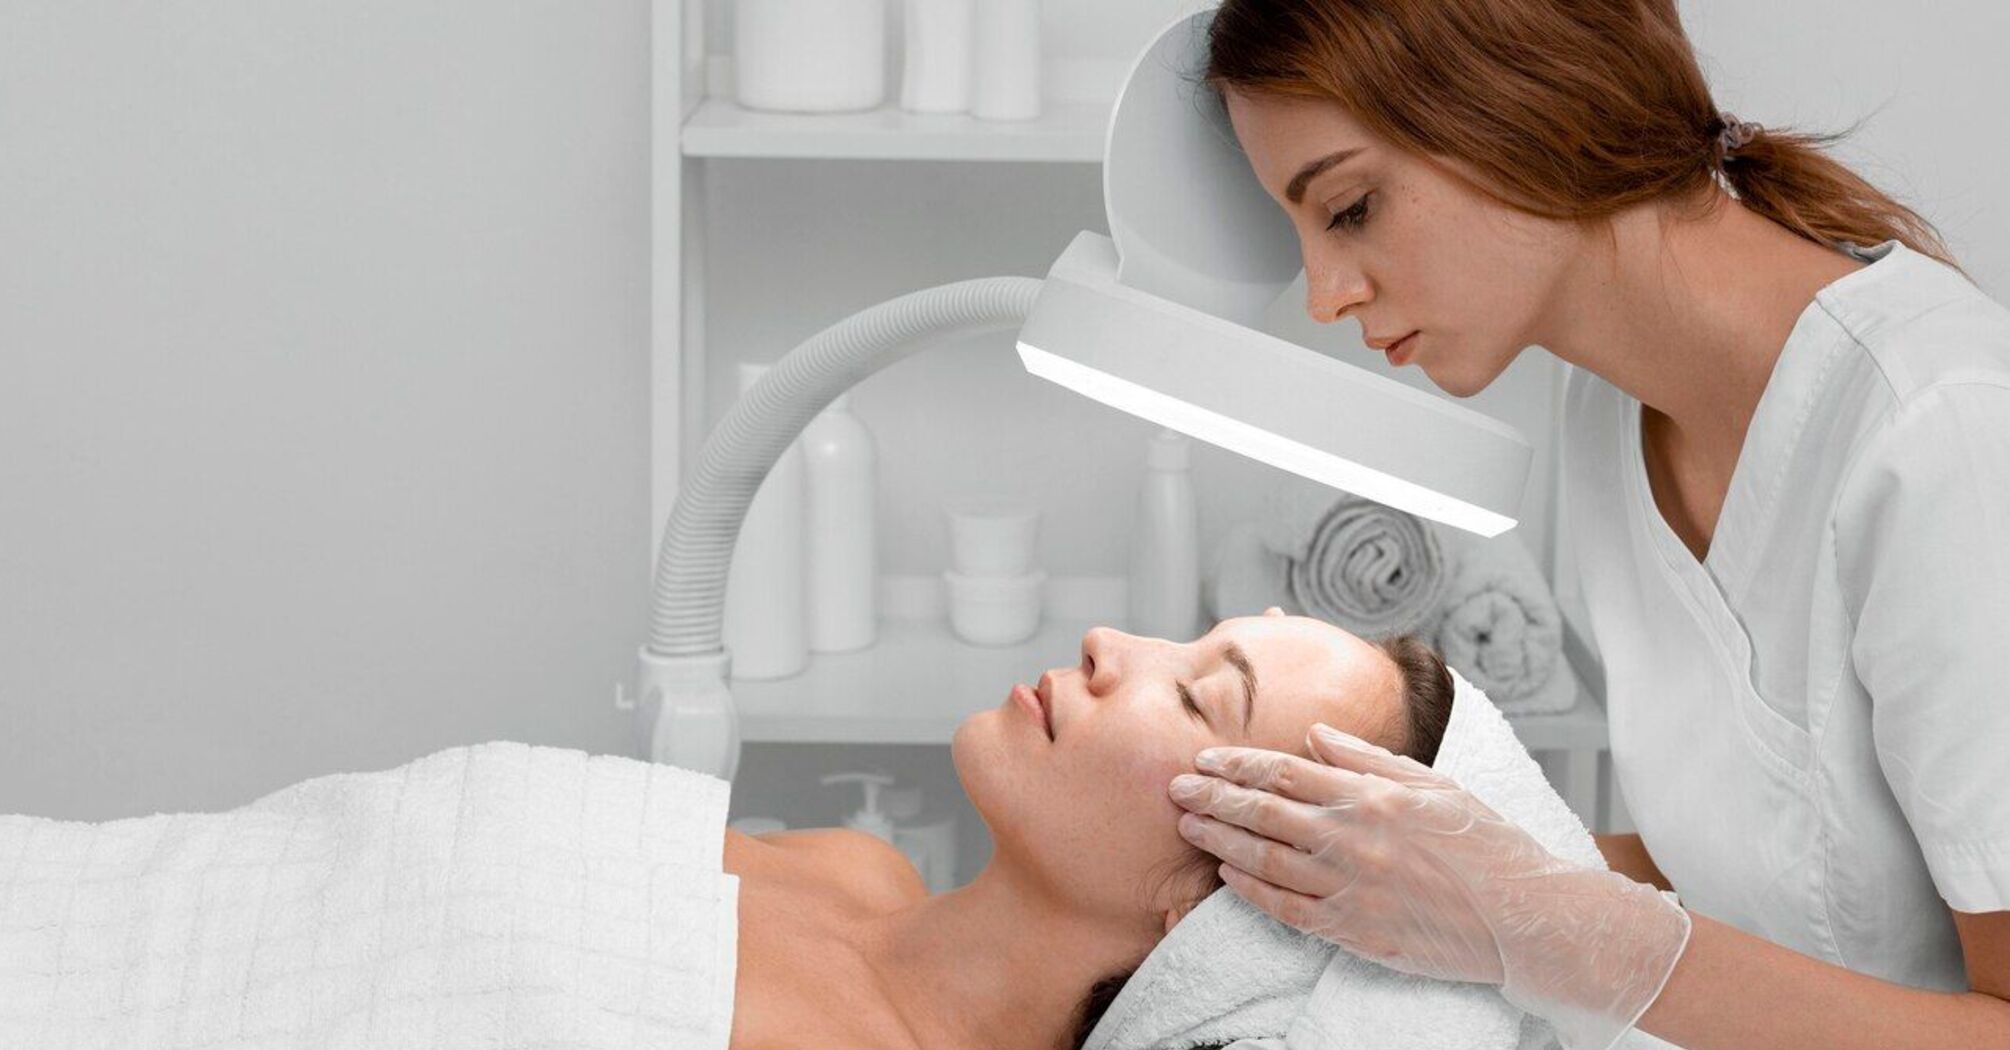 Advantages and disadvantages of mechanical facial cleansing: is it worth doing